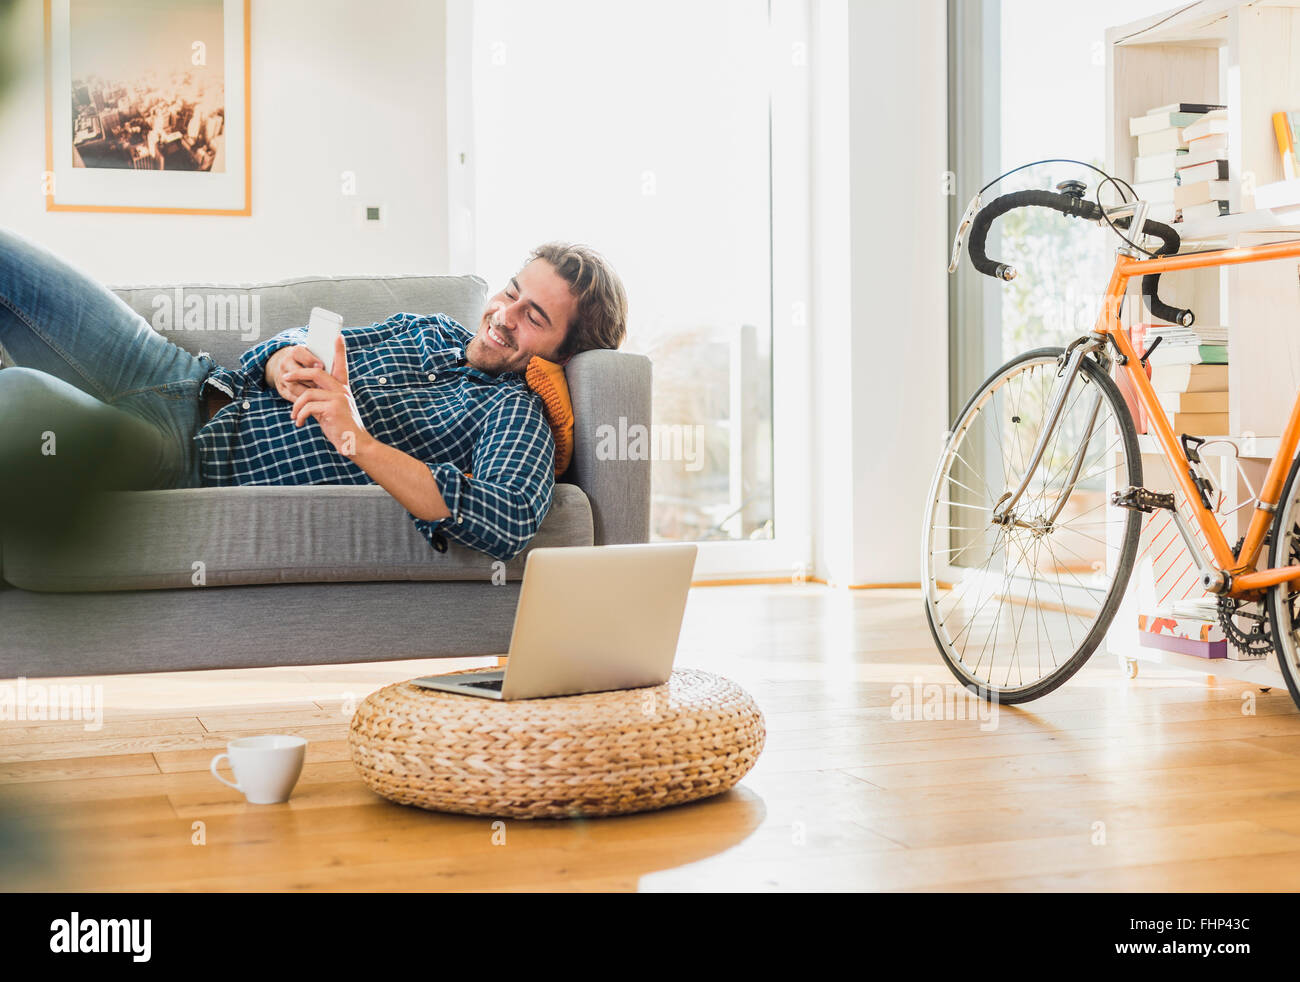 Young man lying on the couch at home looking at laptop Stock Photo